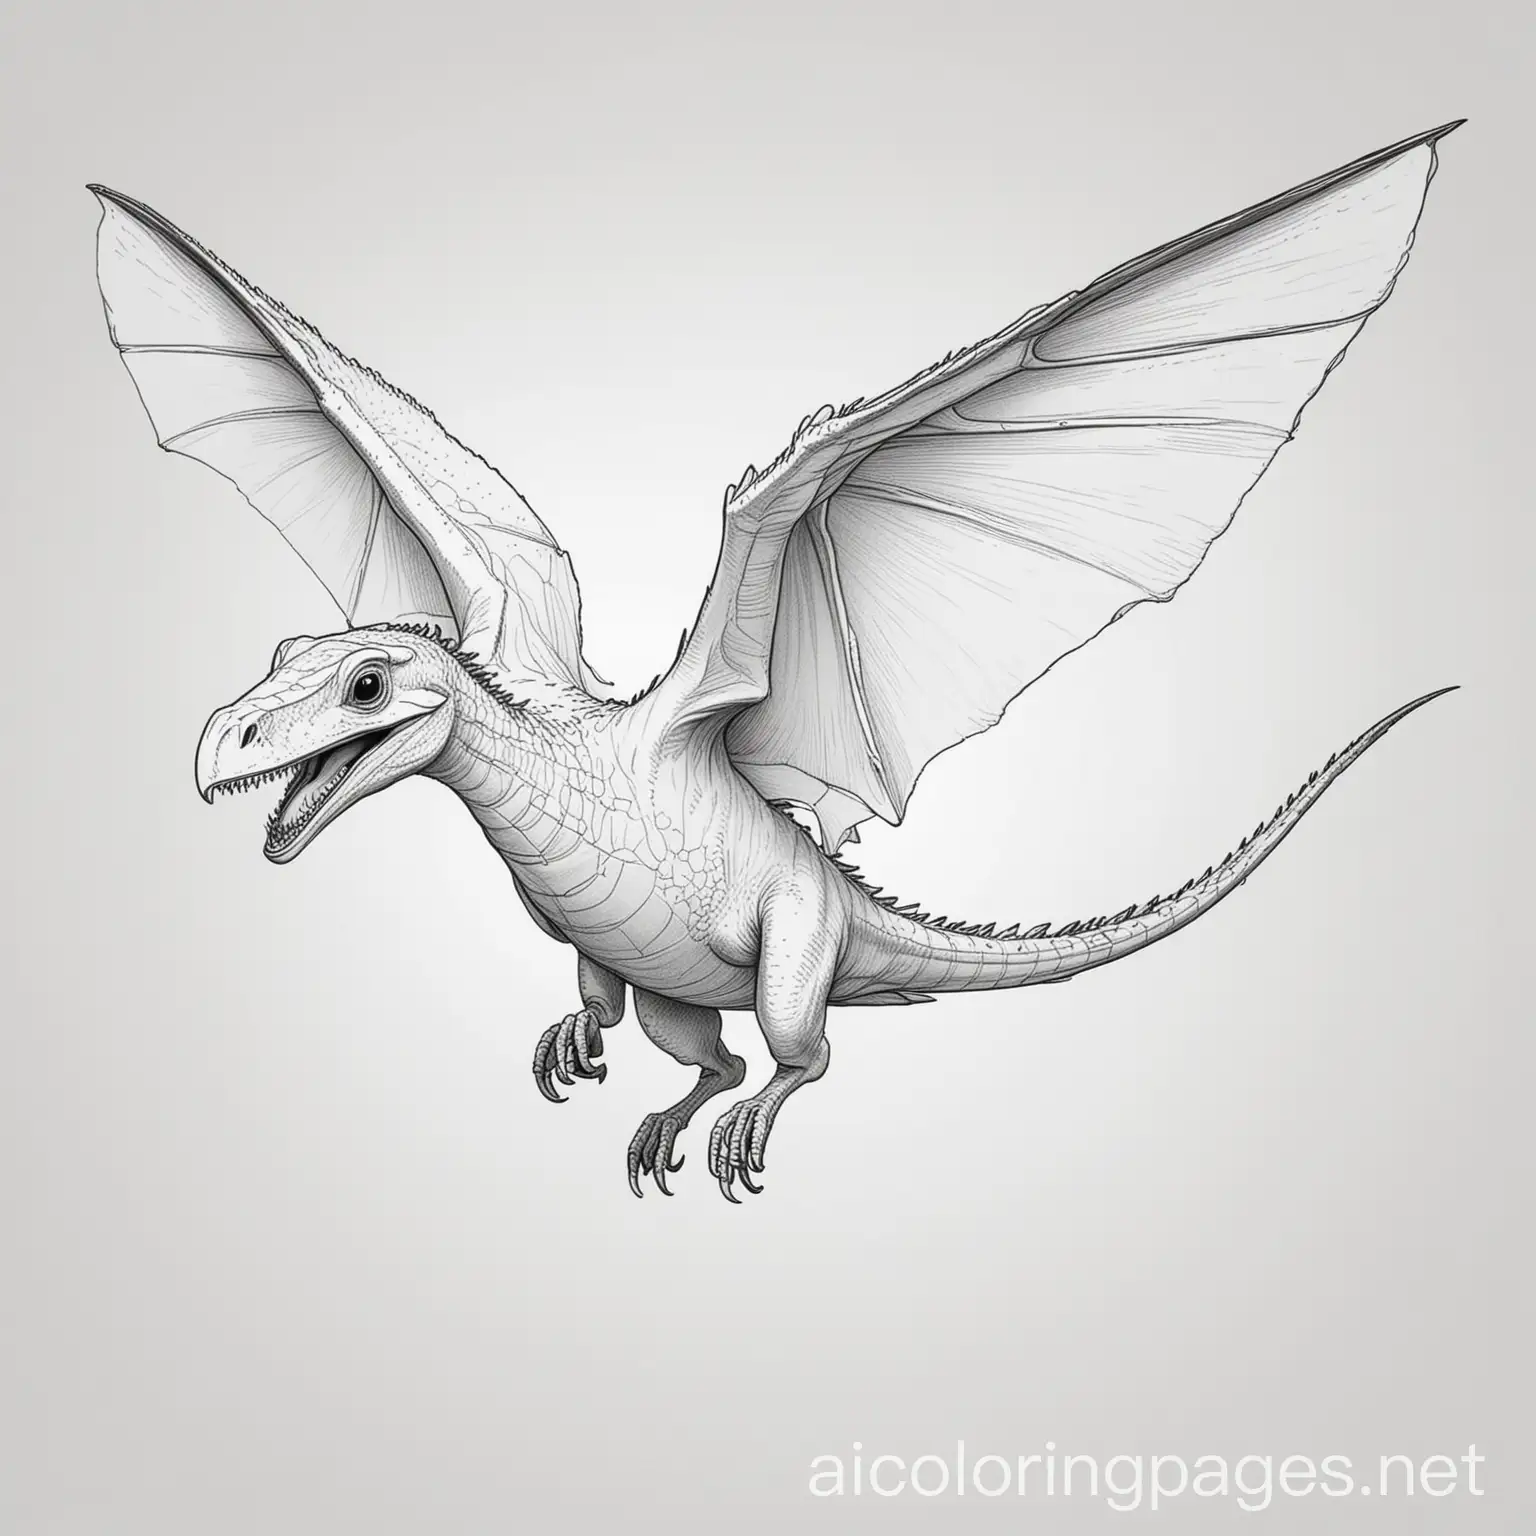 Joyful-Pterodactyl-Coloring-Page-Playful-Prehistoric-Creature-in-Black-and-White-Line-Art